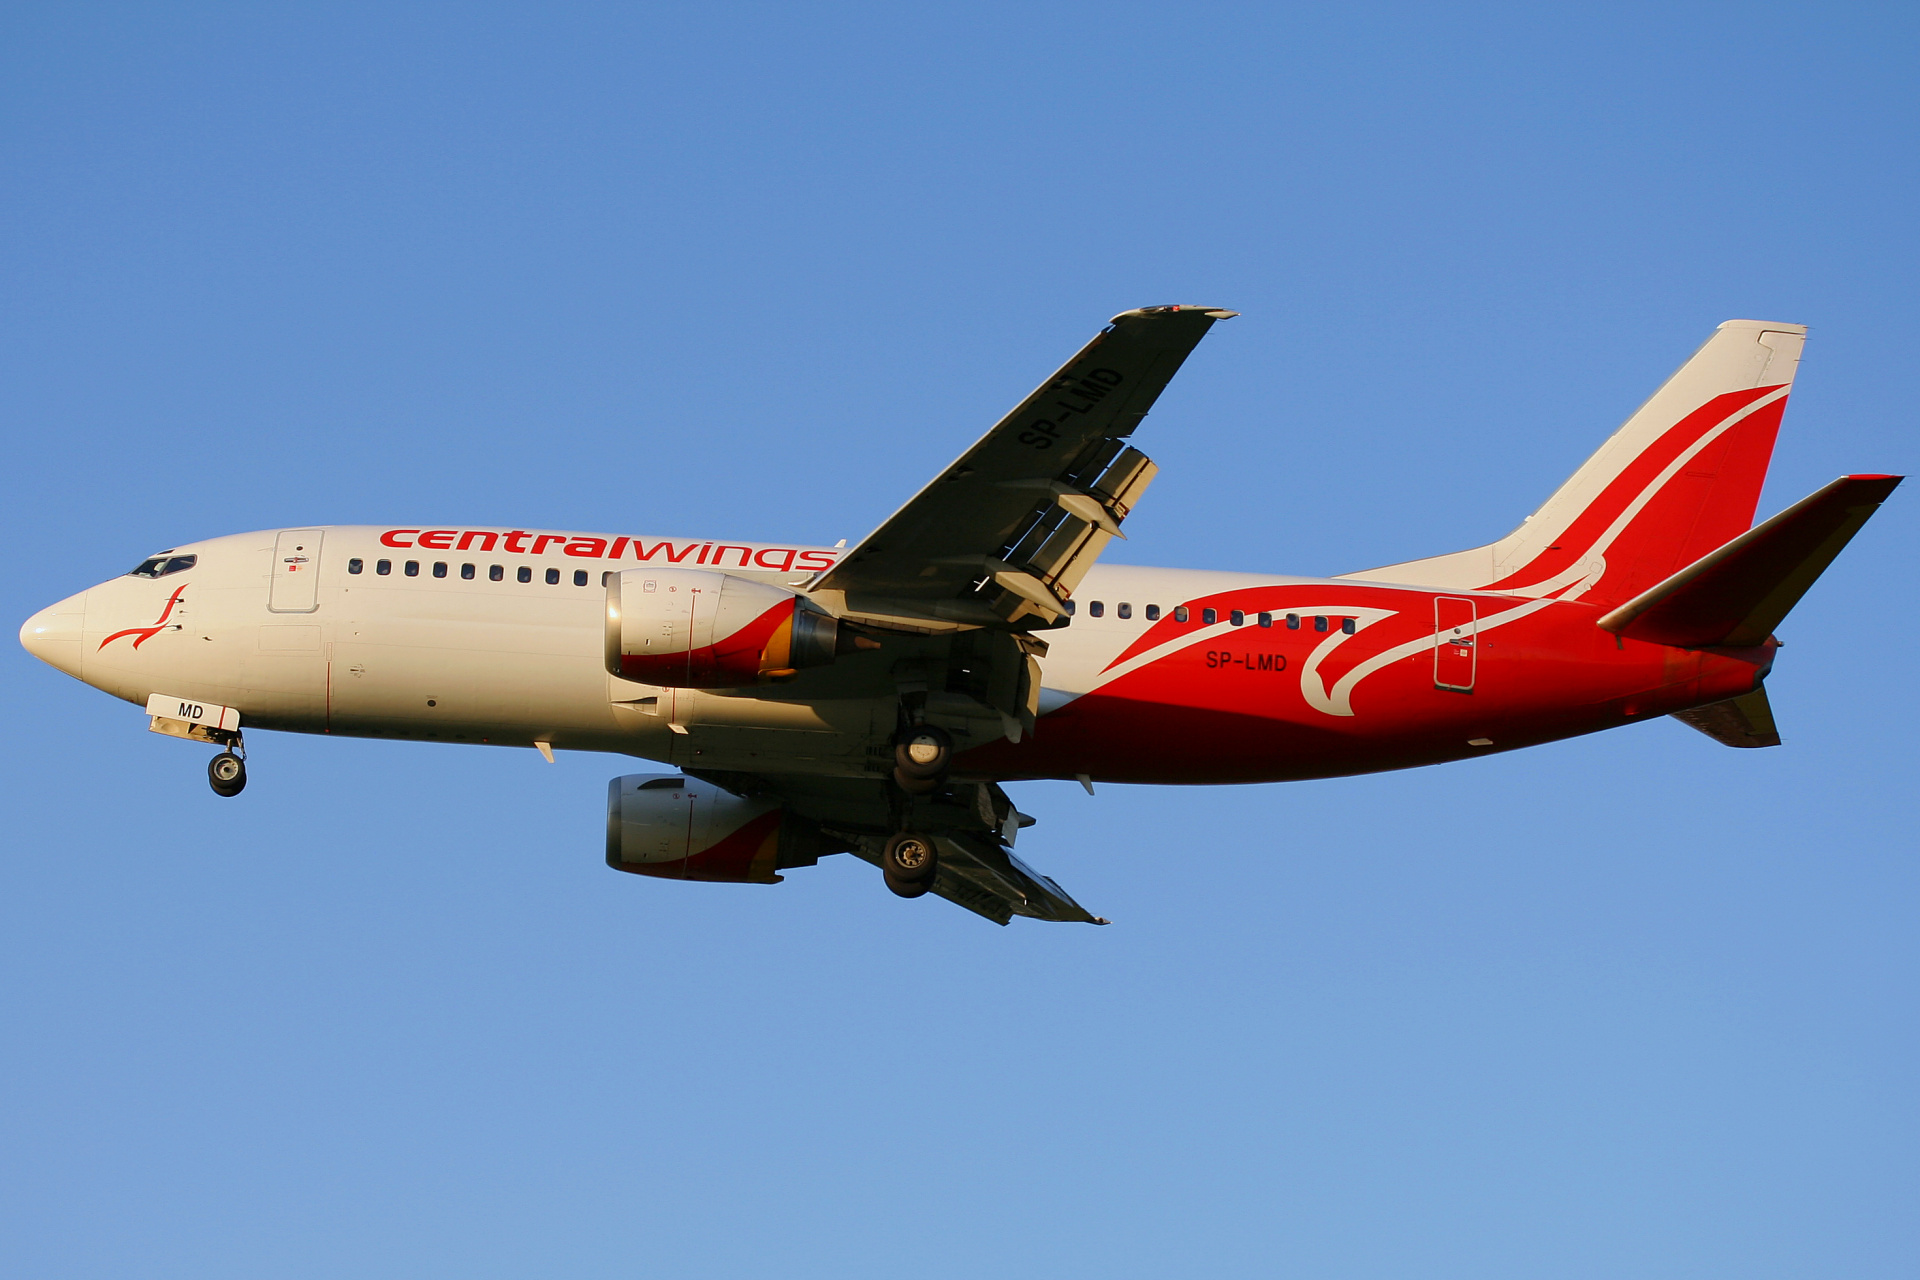 SP-LMD, Centralwings (Aircraft » EPWA Spotting » Boeing 737-300)